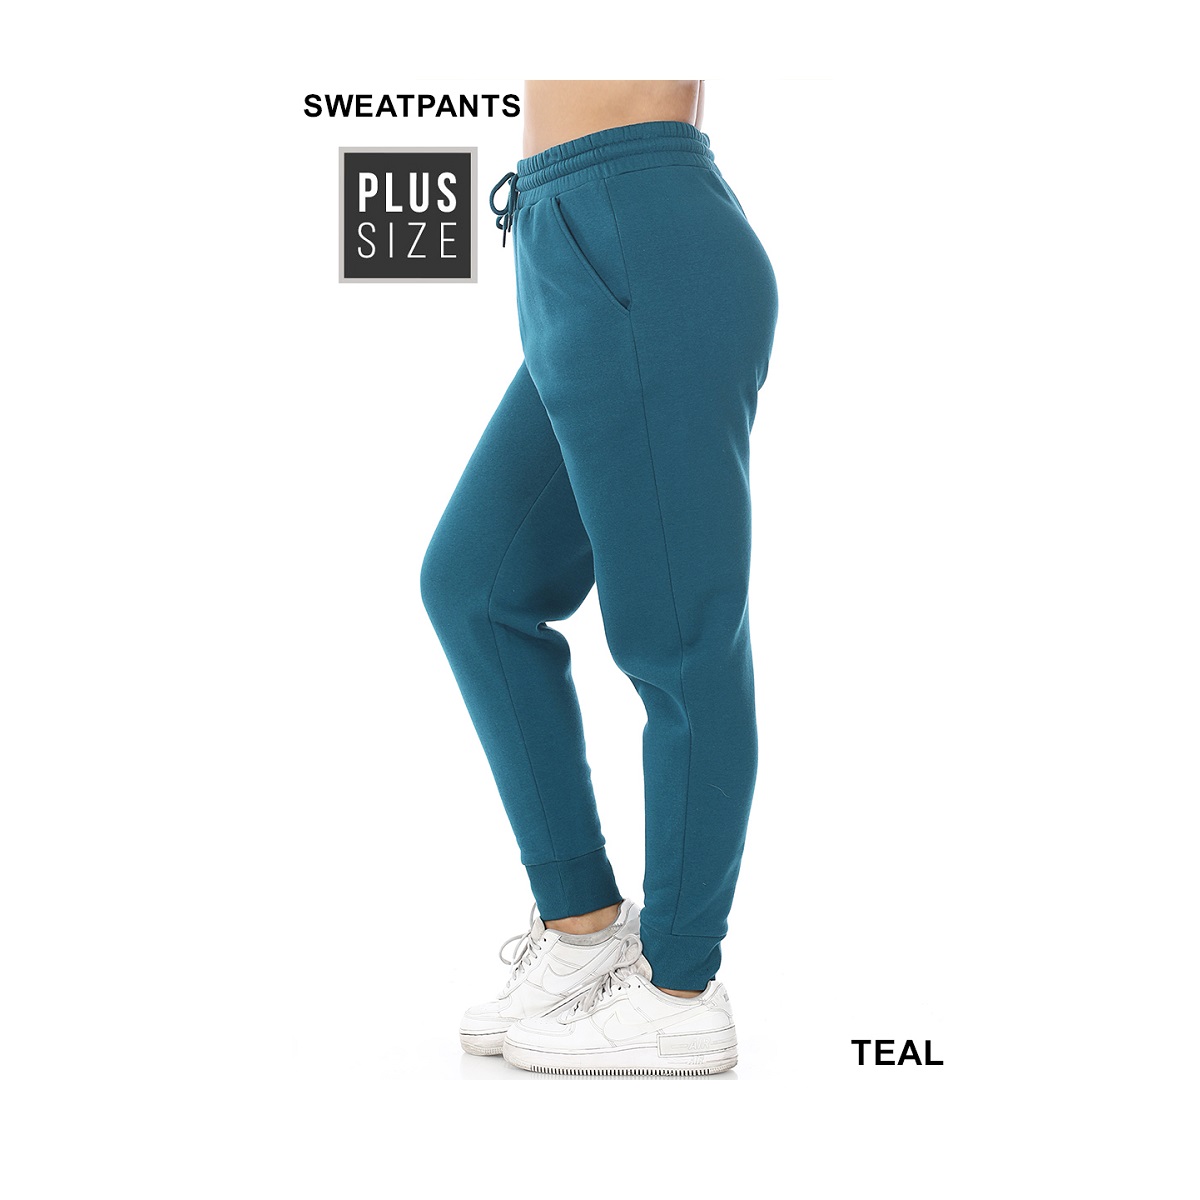 Women's Plus Size Sweatpants with pockets,  Elastic Waistband with Draw String,